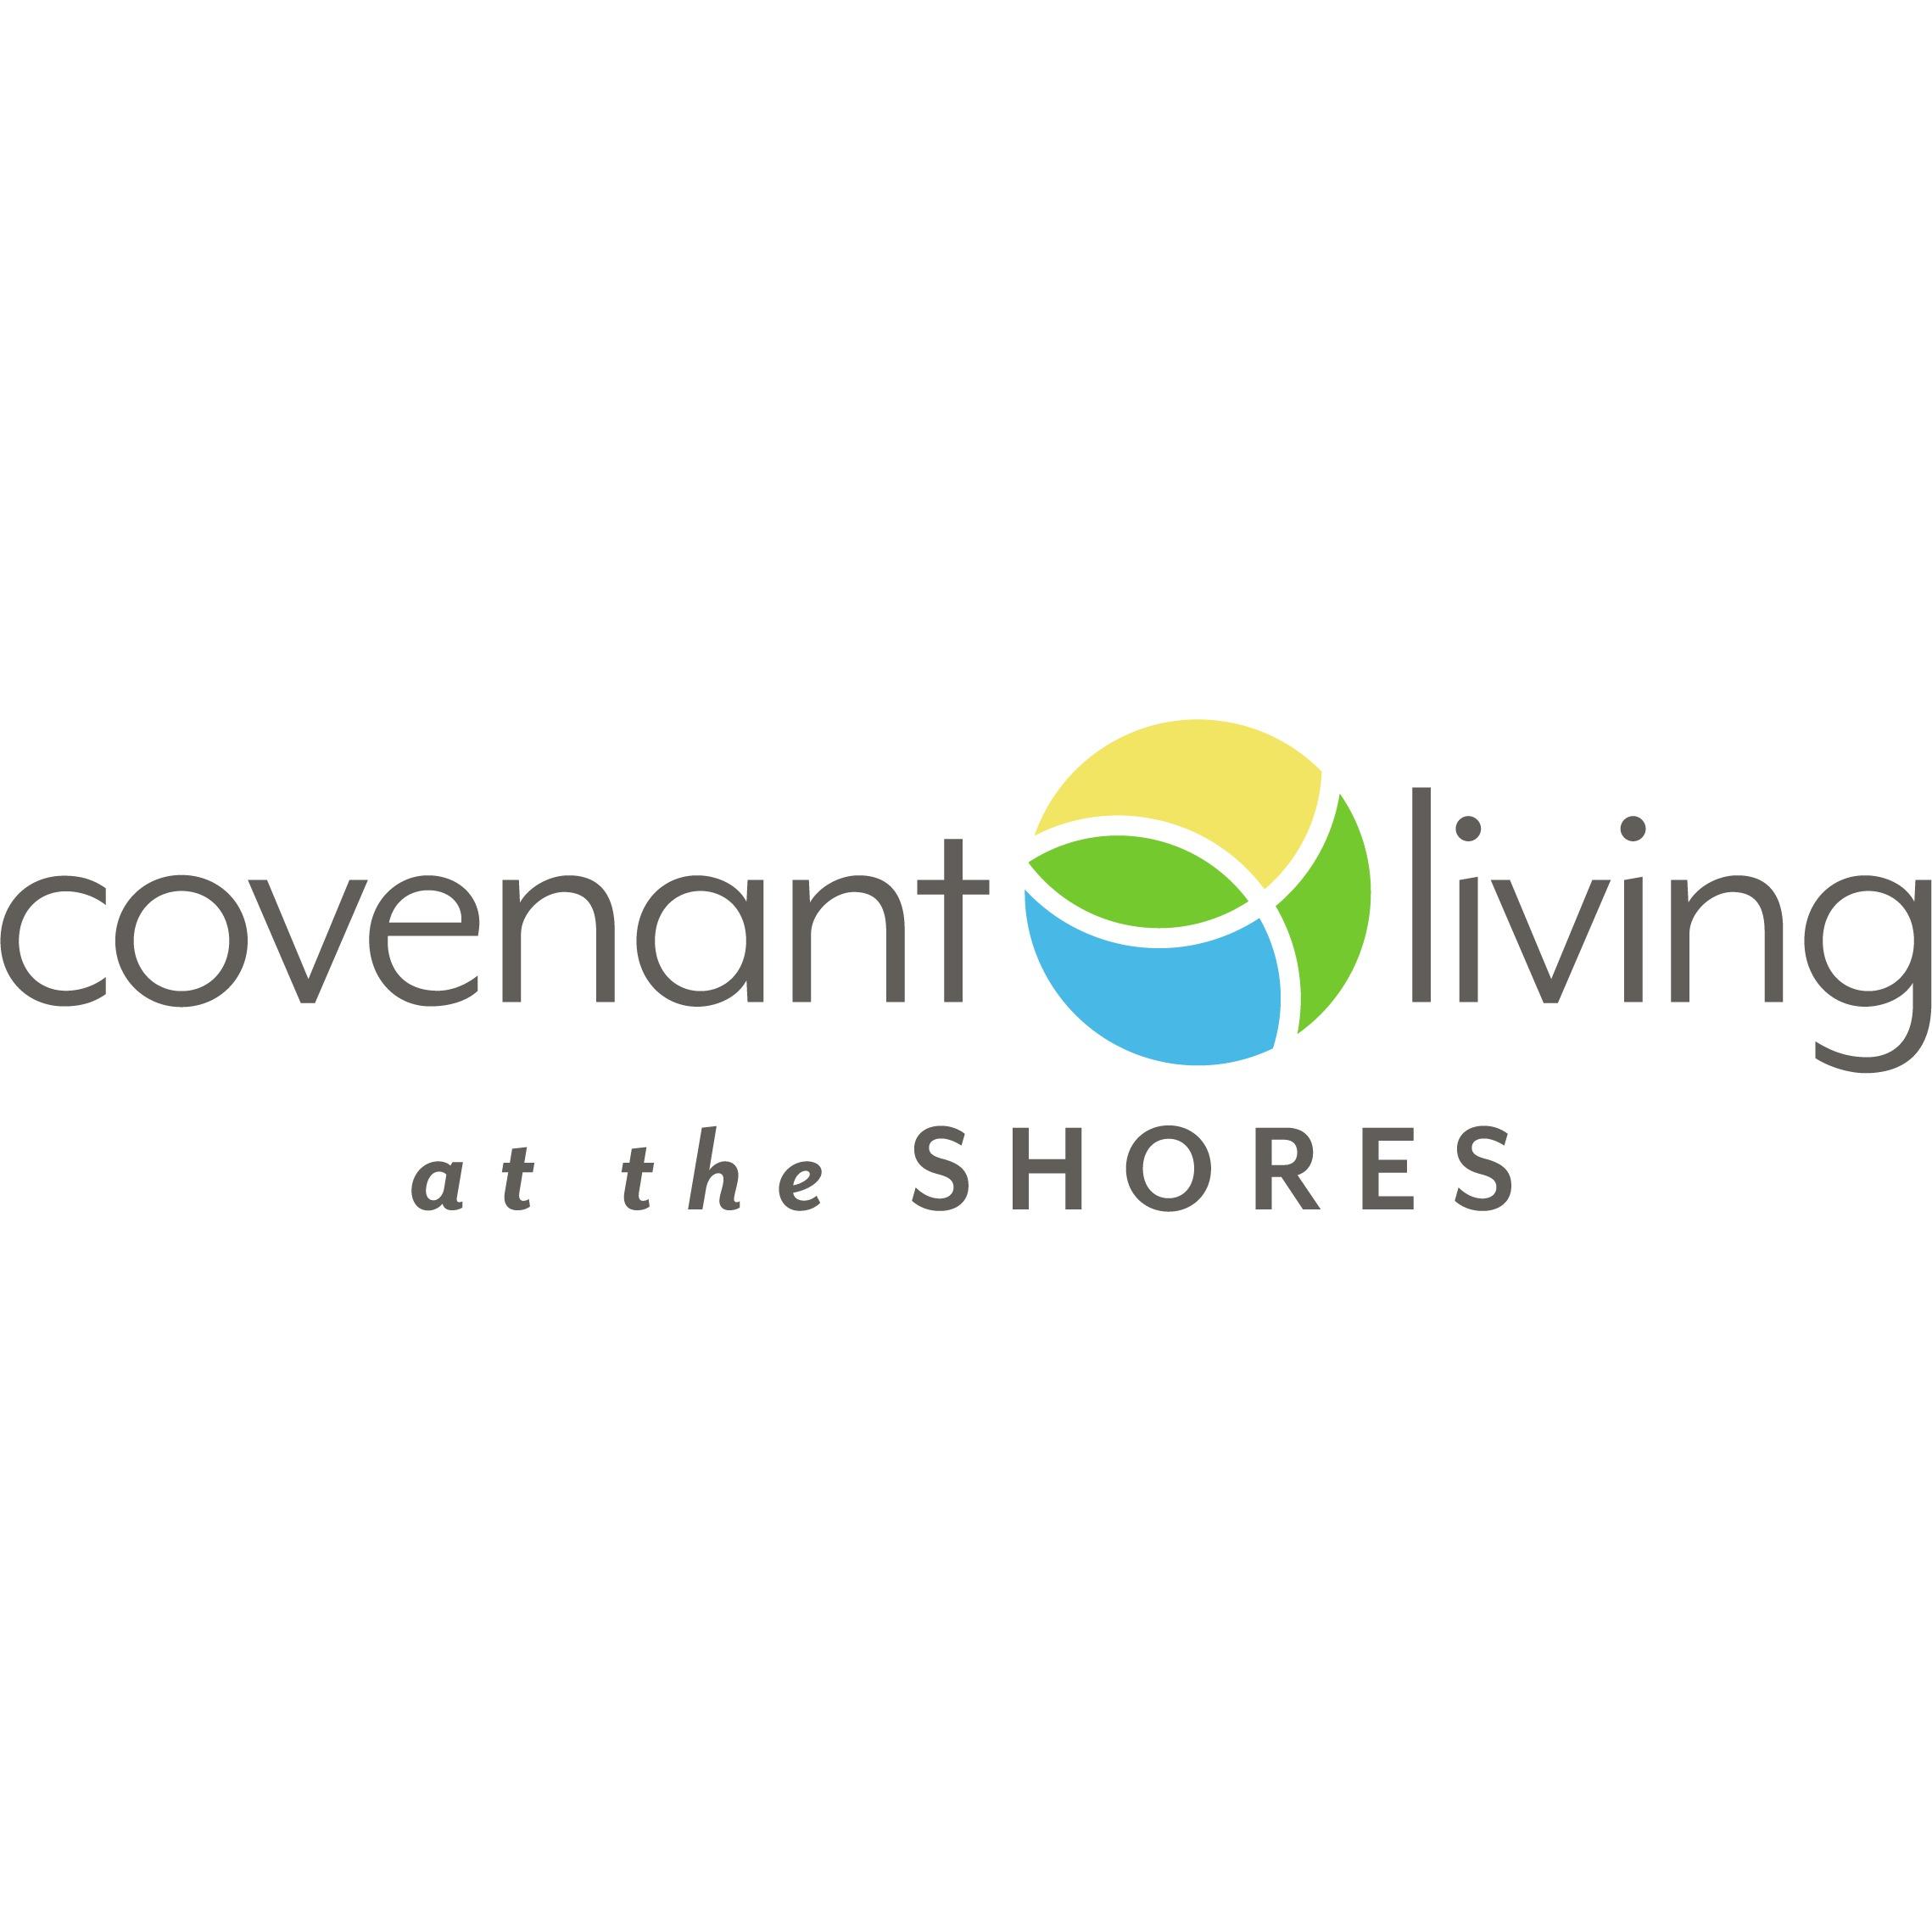 Covenant Living at the Shores